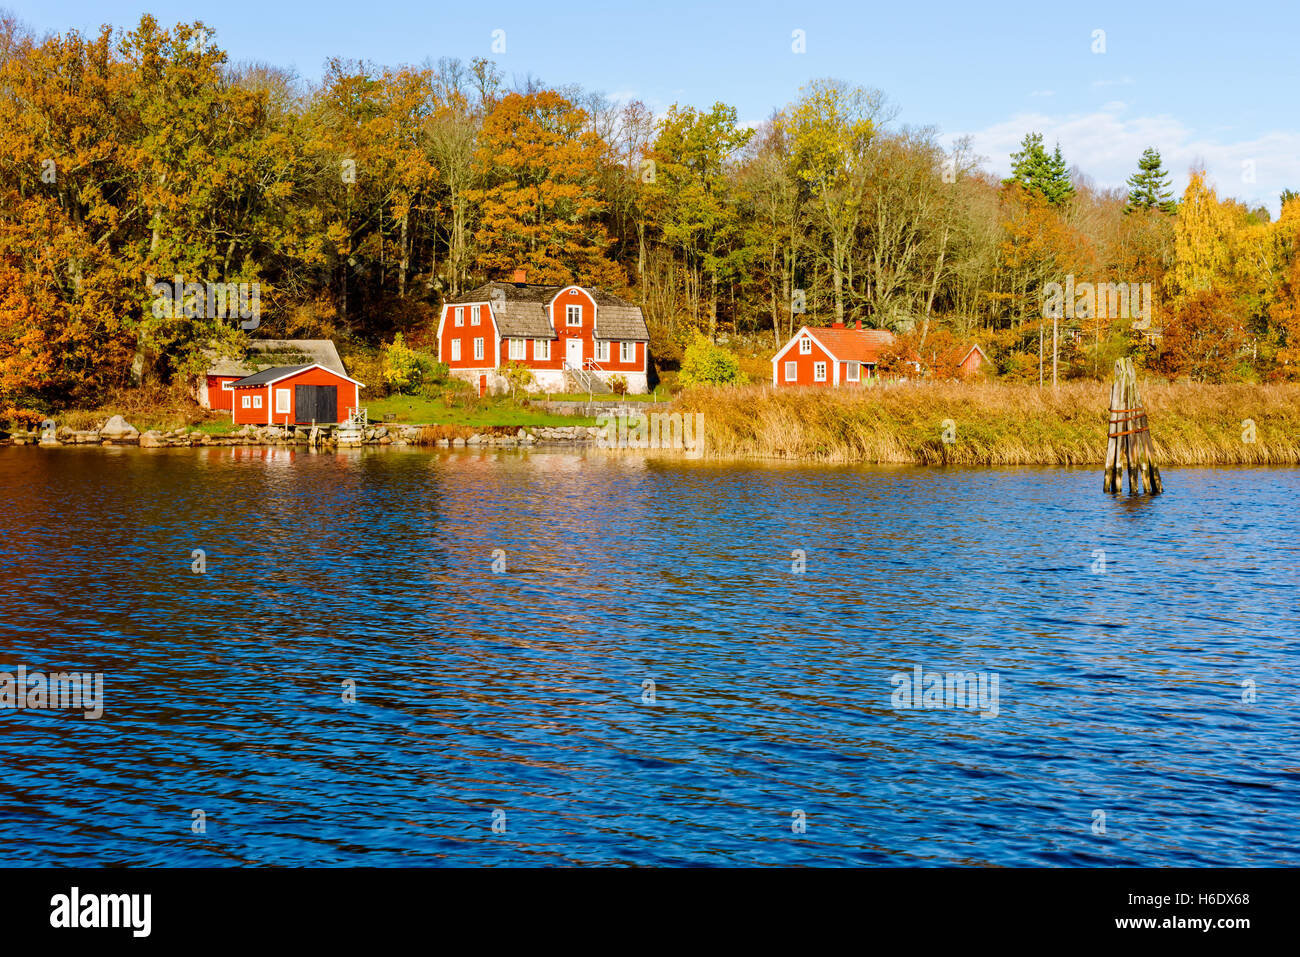 Jarnavik, Sweden - October 25, 2016: Environmental documentary of coastal living. Red wooden home in colorful fall landscape on Stock Photo